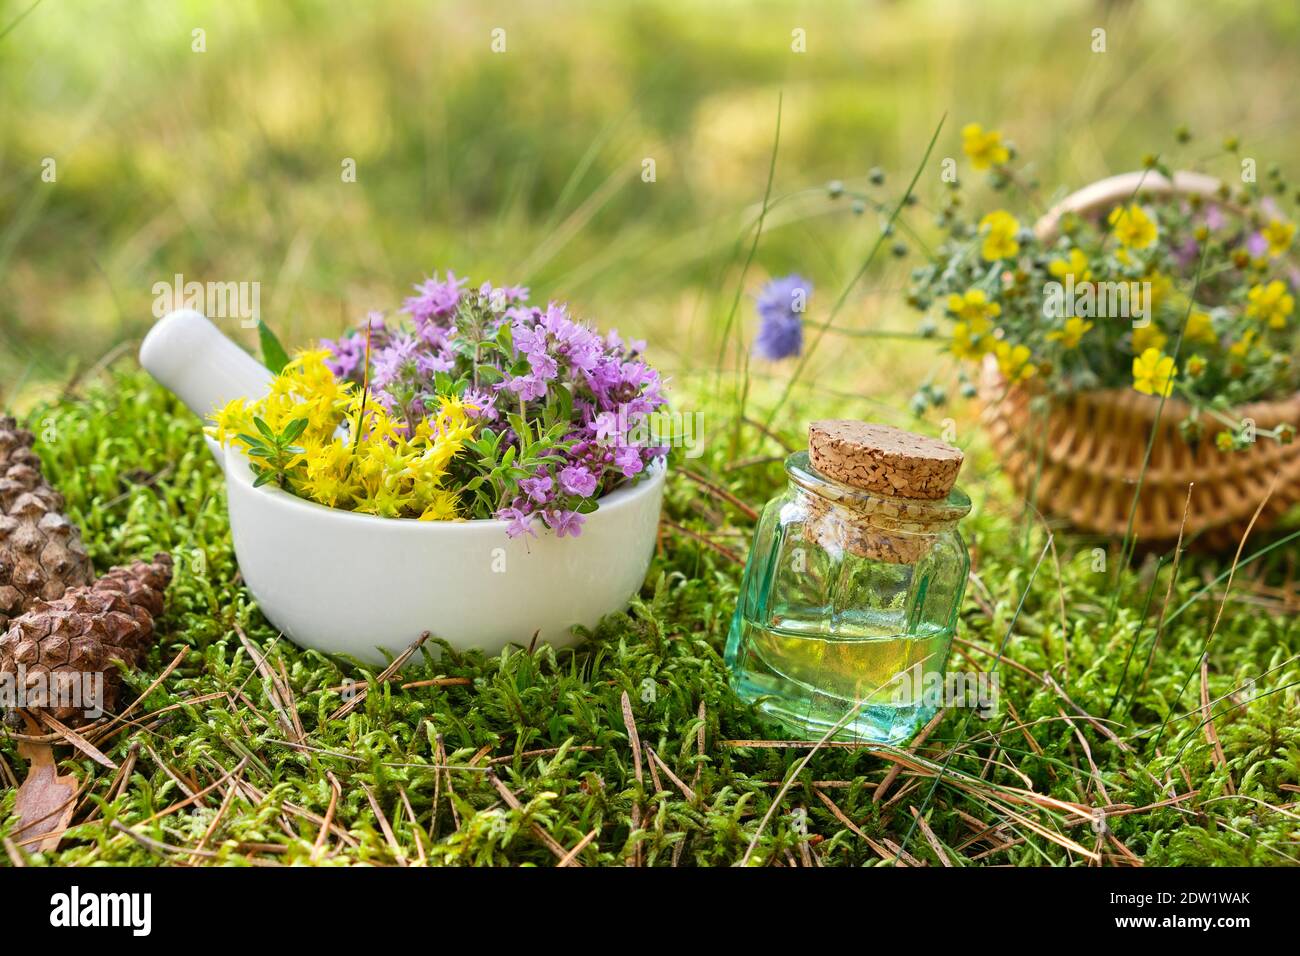 Bottle of essential oil or infusion, mortar of thyme and sedum flowers, basket of medicinal herbs on moss in forest outdoors. Alternative medicine. Stock Photo